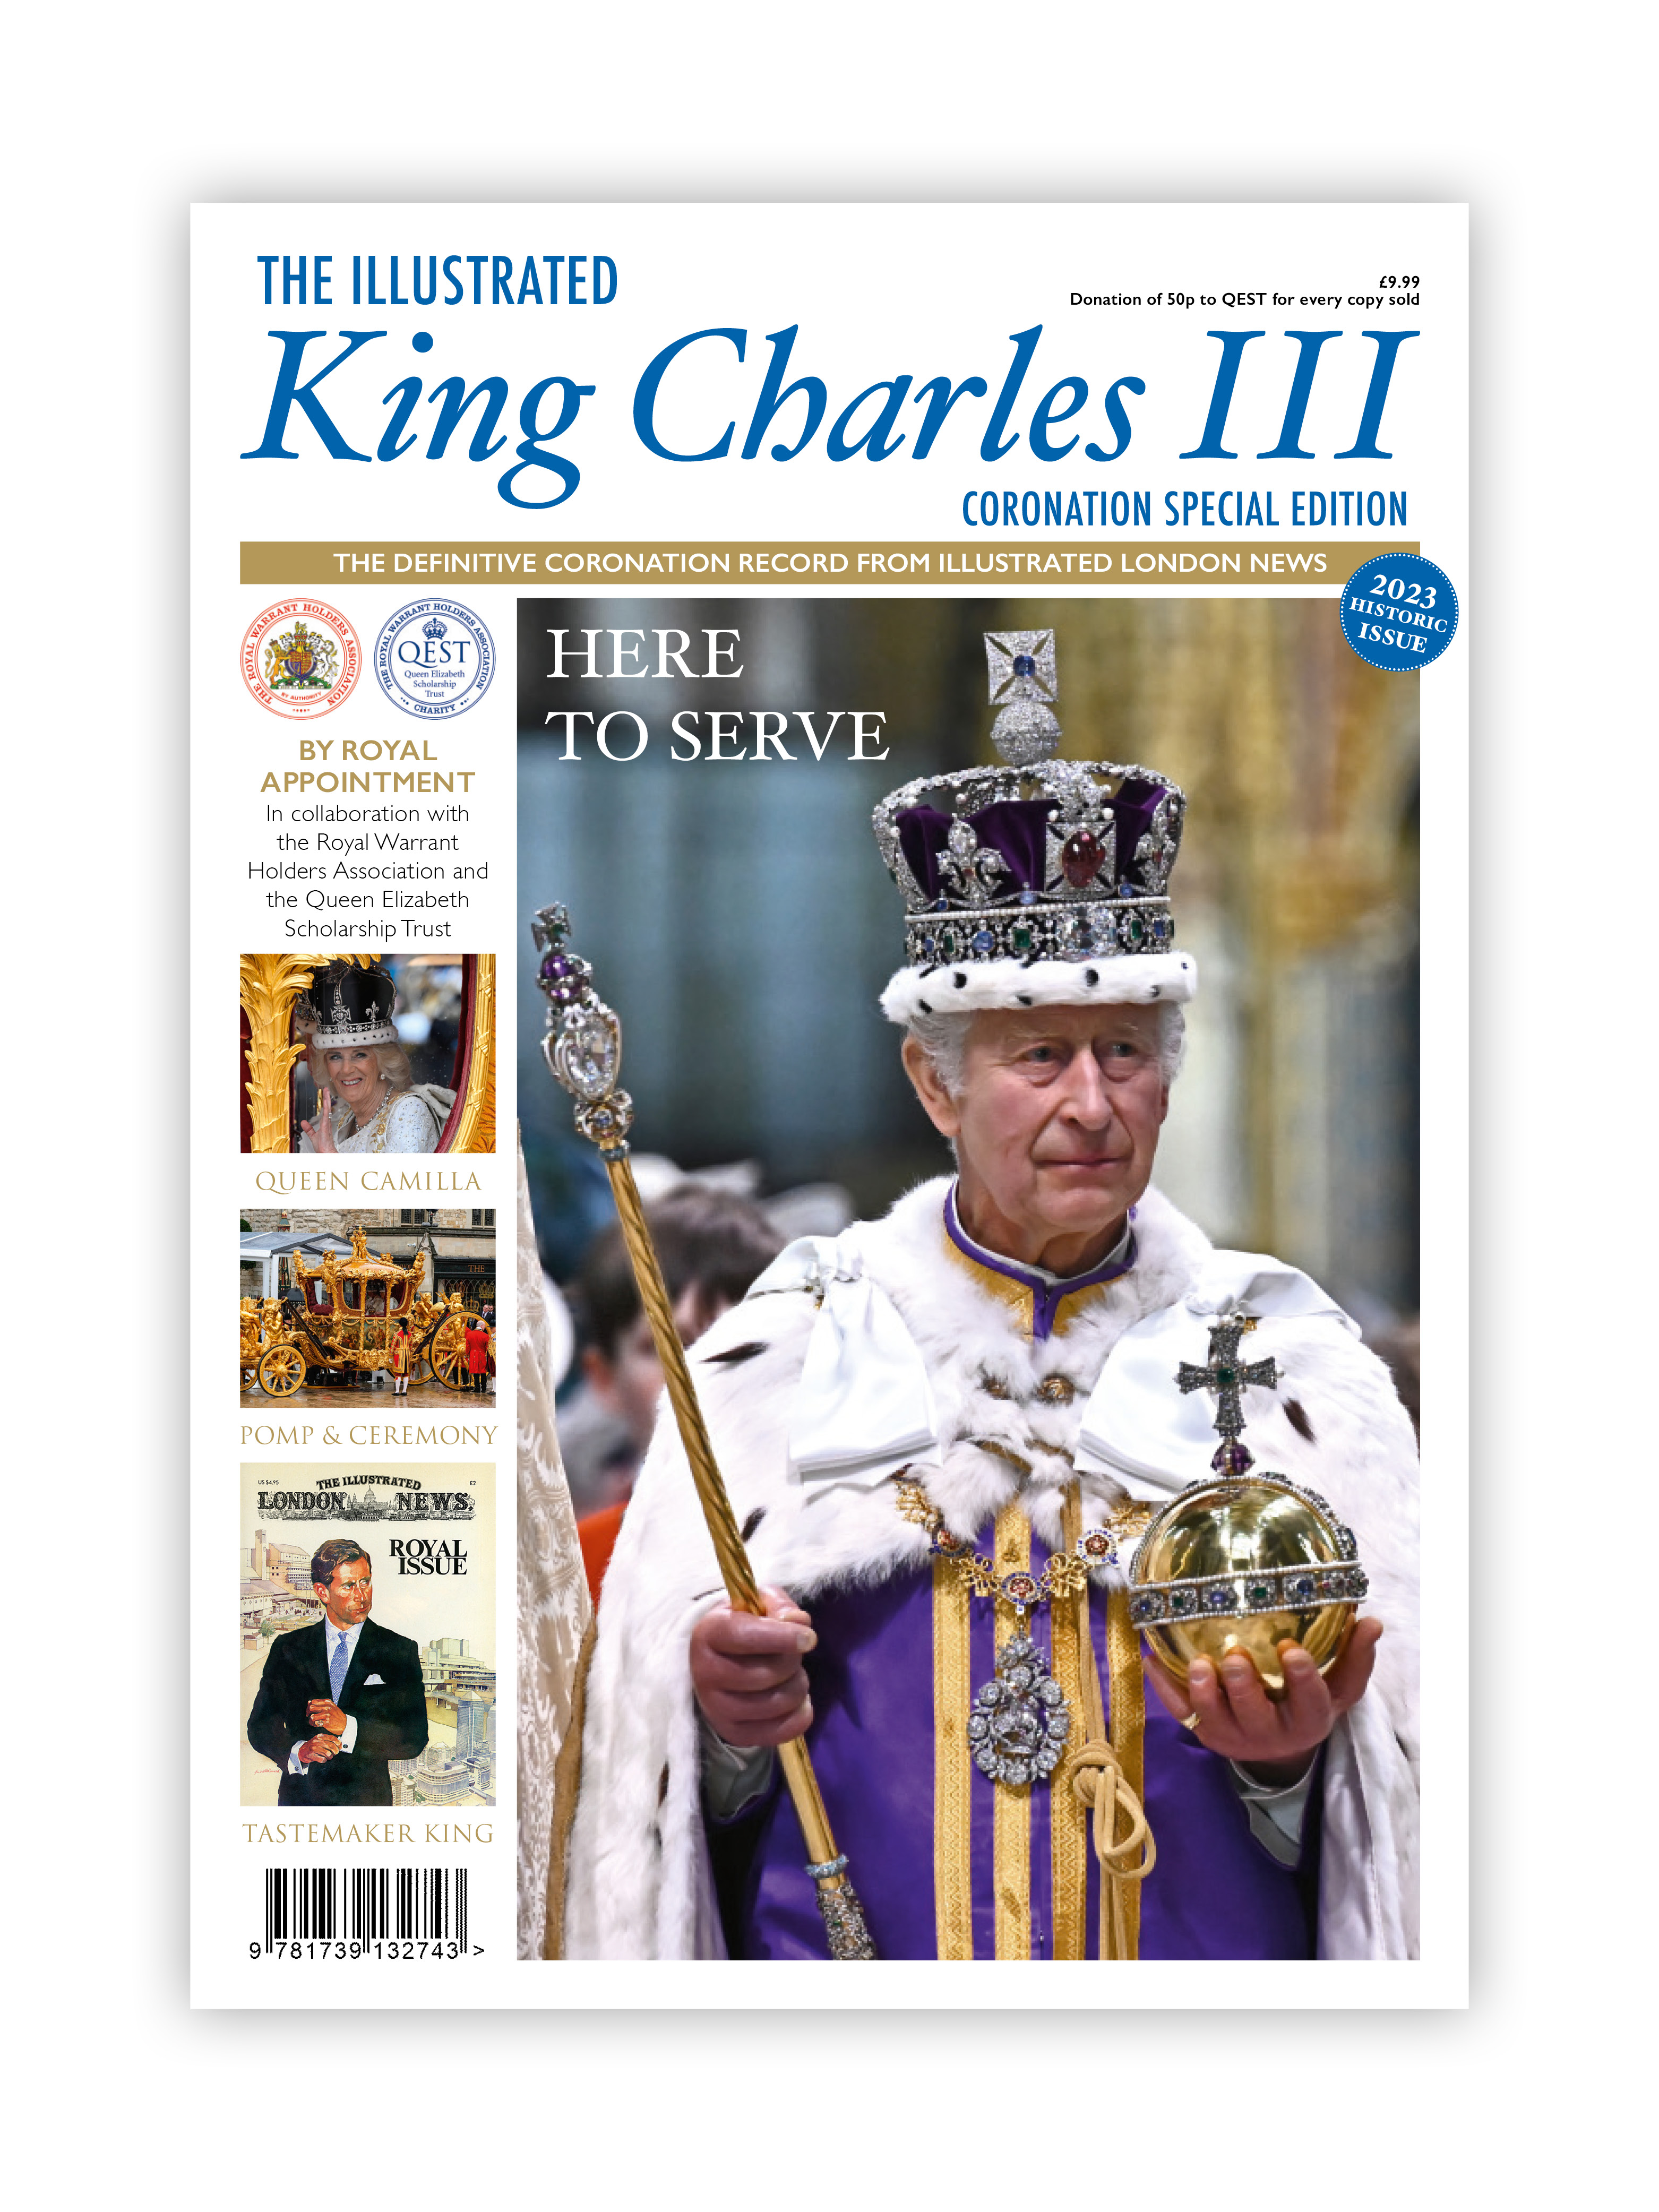 The Illustrated King Charles III